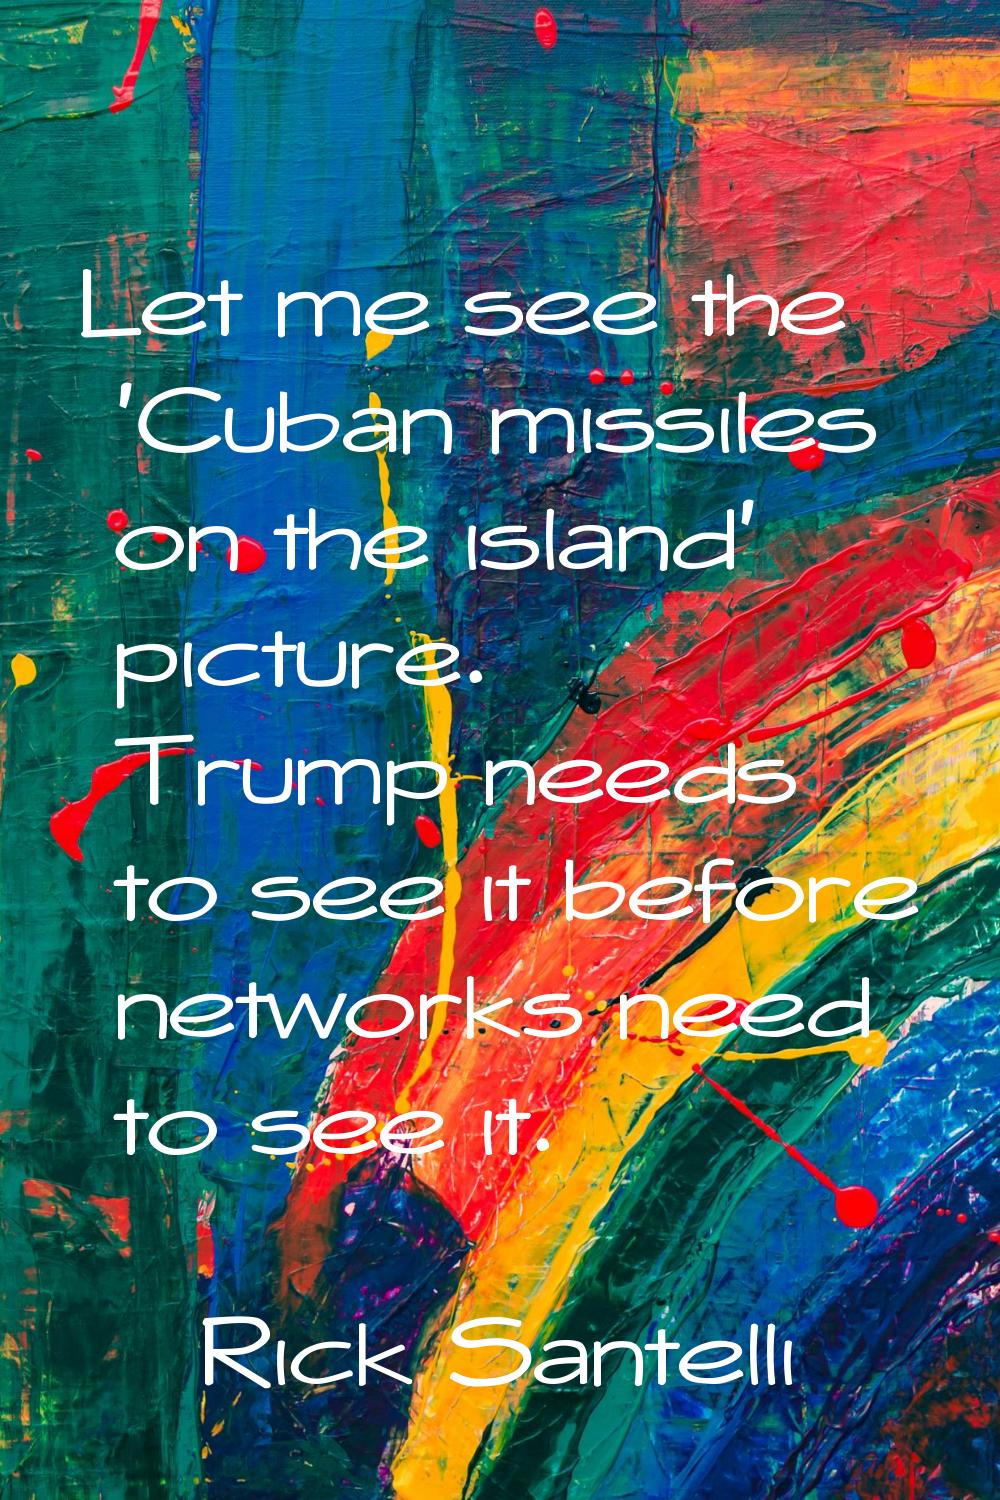 Let me see the 'Cuban missiles on the island' picture. Trump needs to see it before networks need t